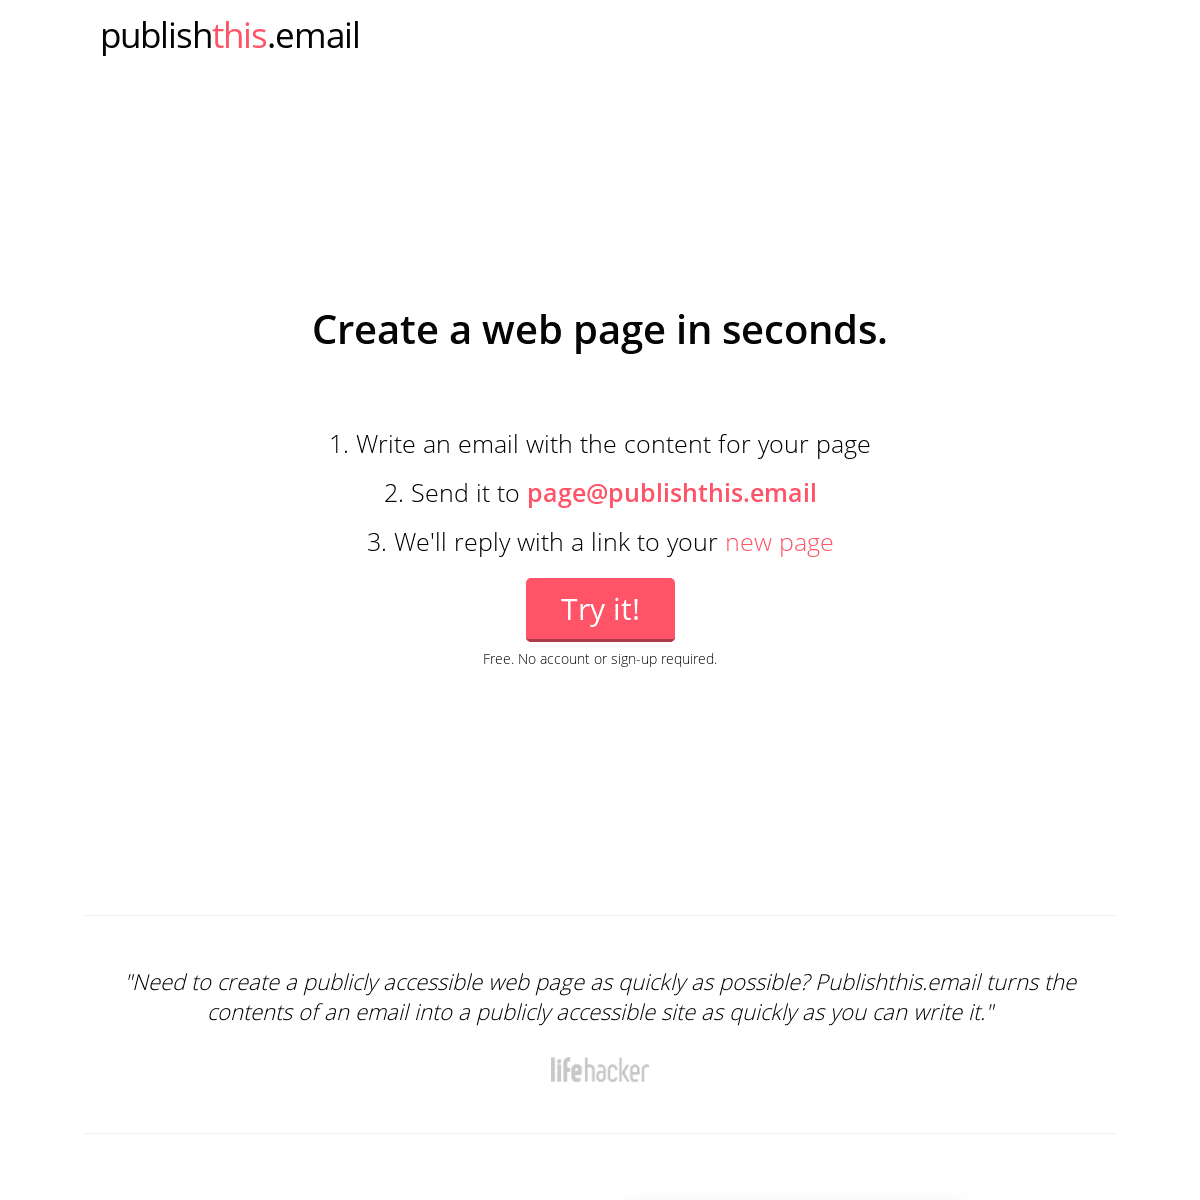 publishthis.email - Create a Web Page in Seconds